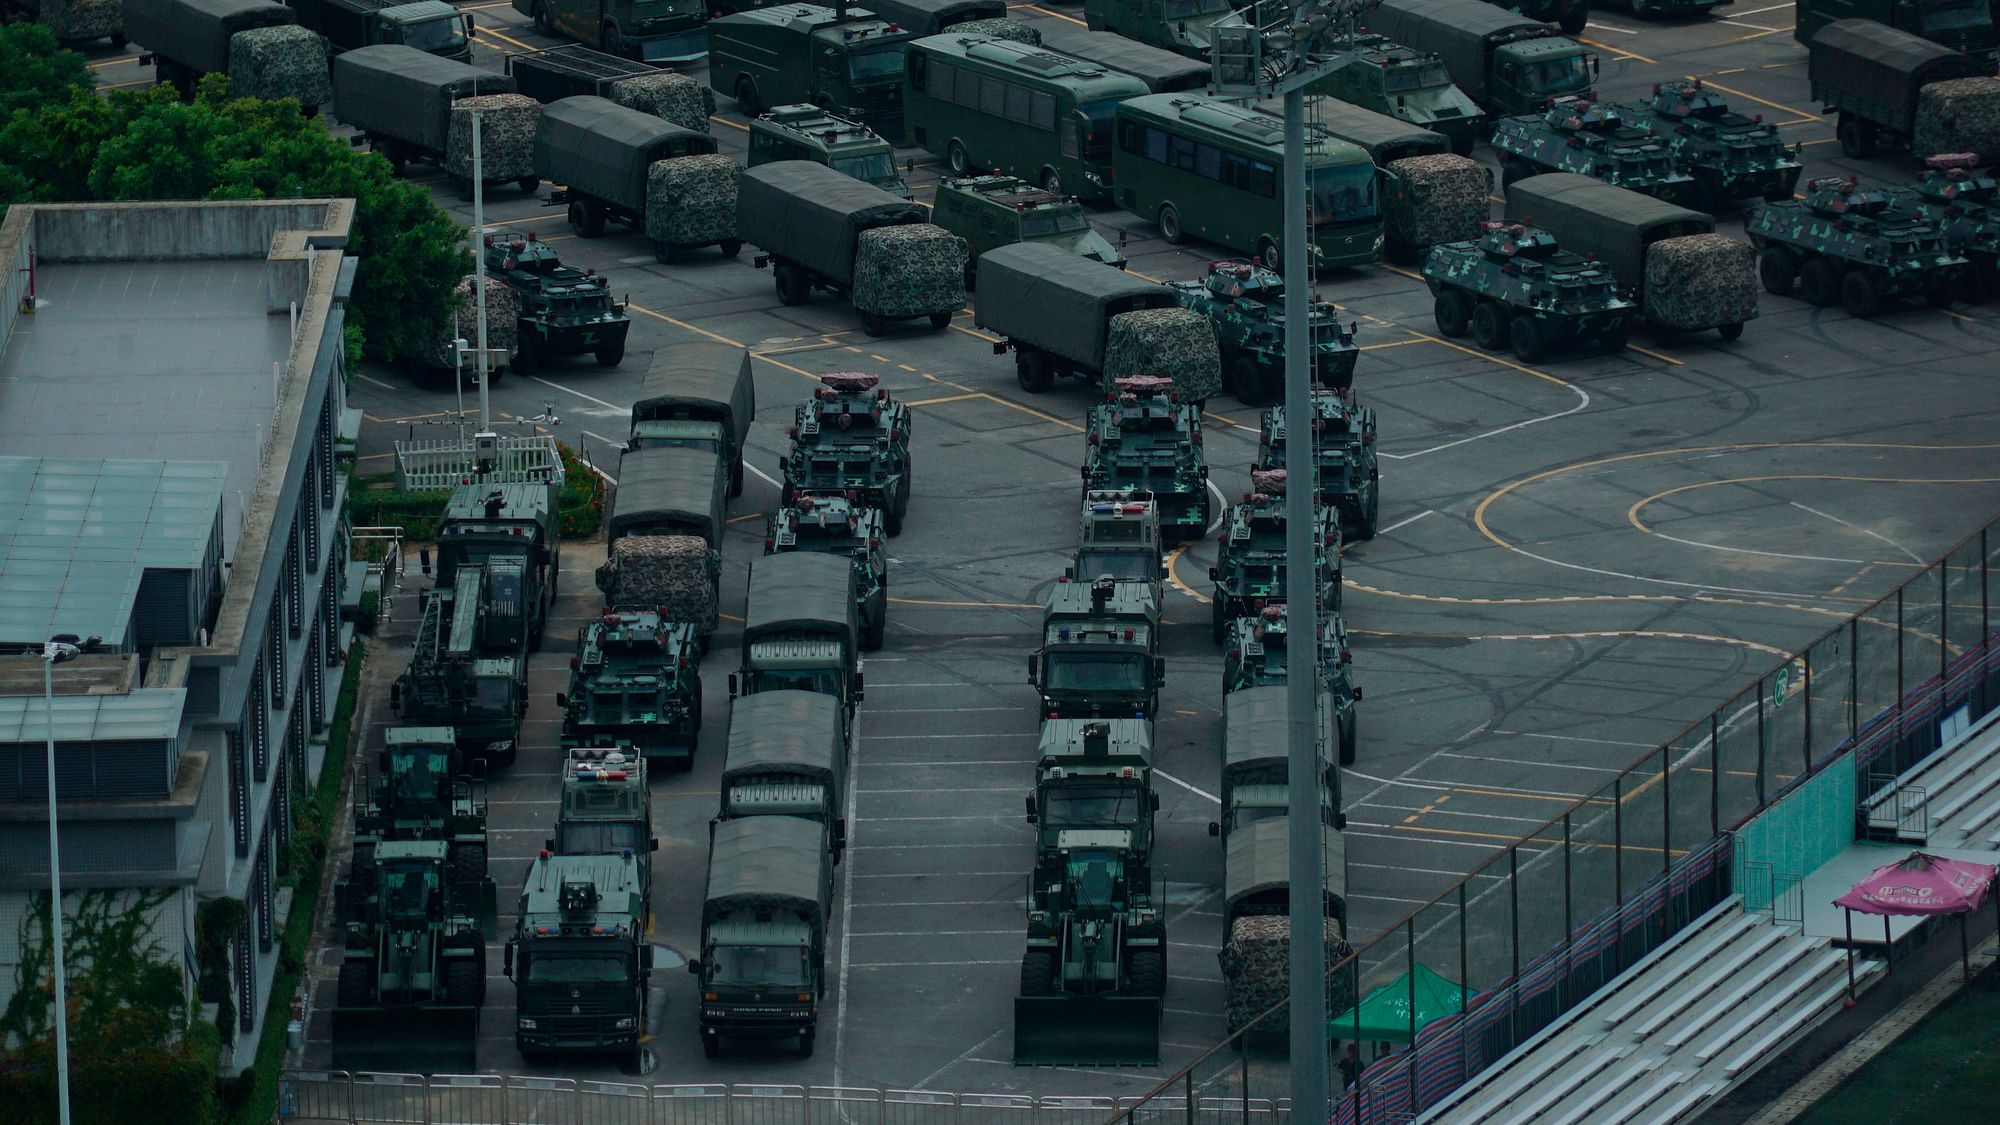 Armoured vehicles and troop trucks are parked in a lot by Shenzhen Bay Stadium in Shenzhen, China 